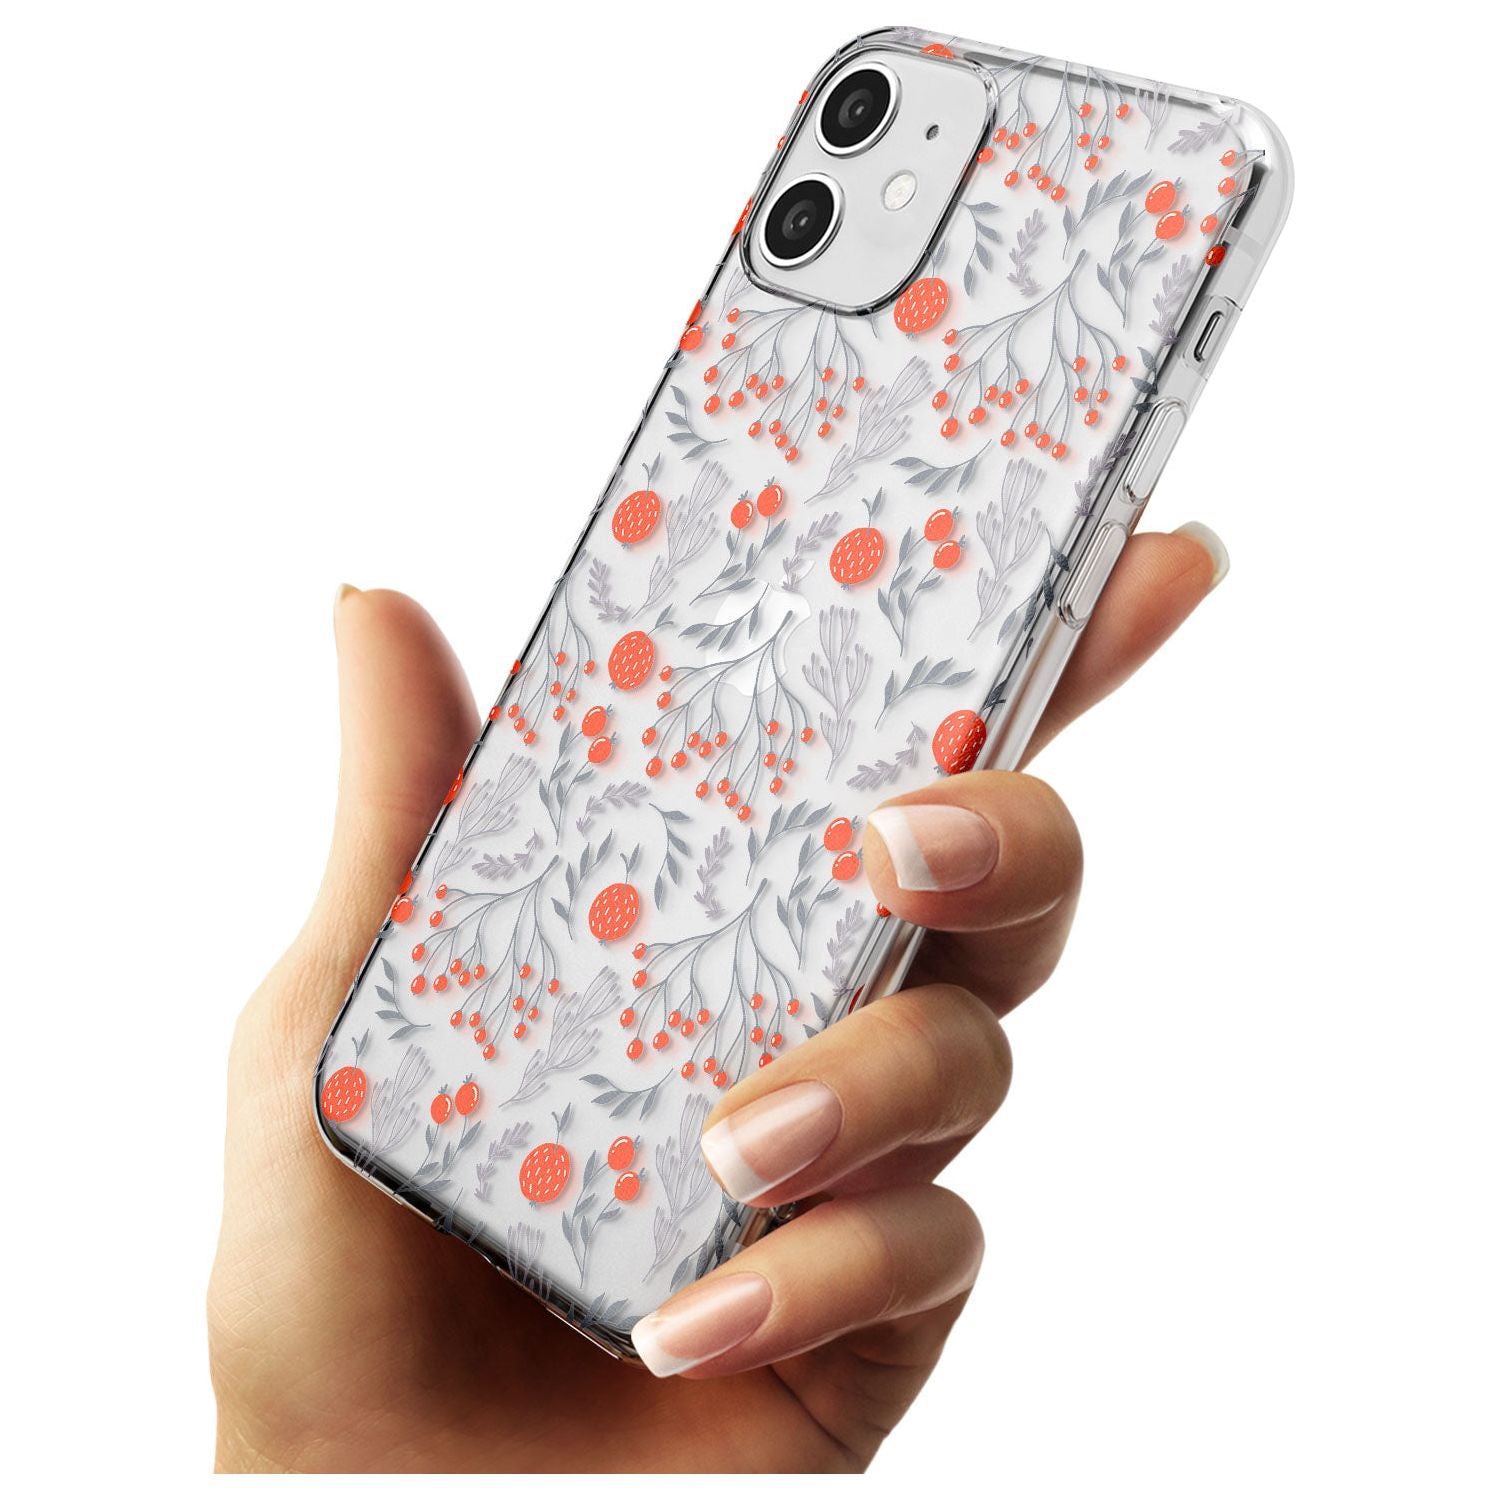 Red Fruits Transparent Floral Slim TPU Phone Case for iPhone 11